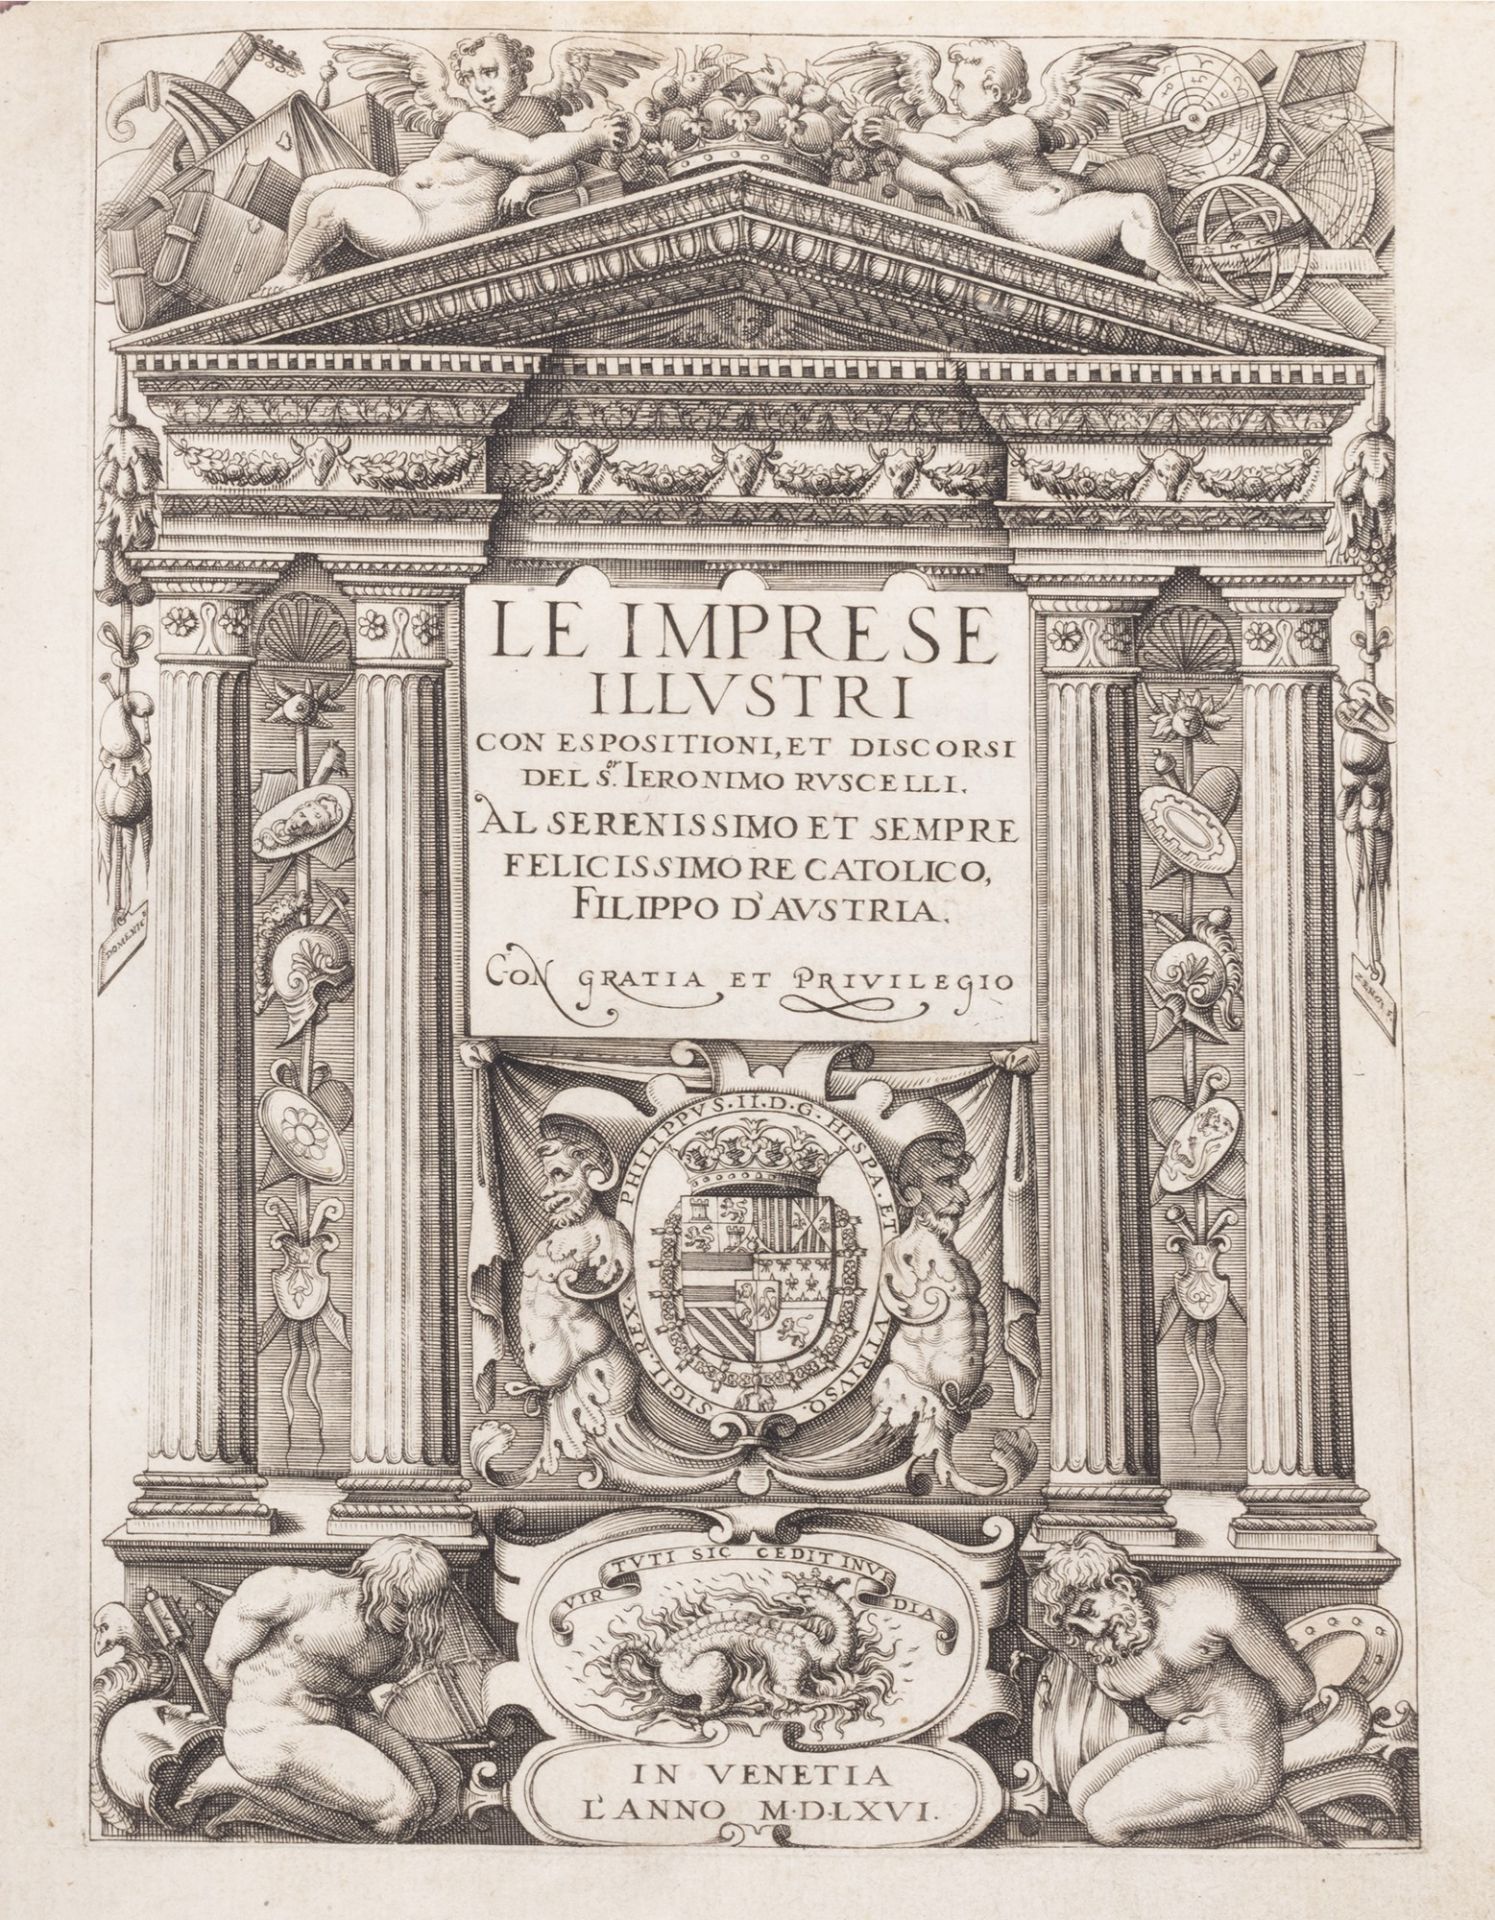 Emblemata - Ruscelli, Girolamo - Illustrious companies with exhibitions, and speeches by S.or Ieroni - Image 5 of 5